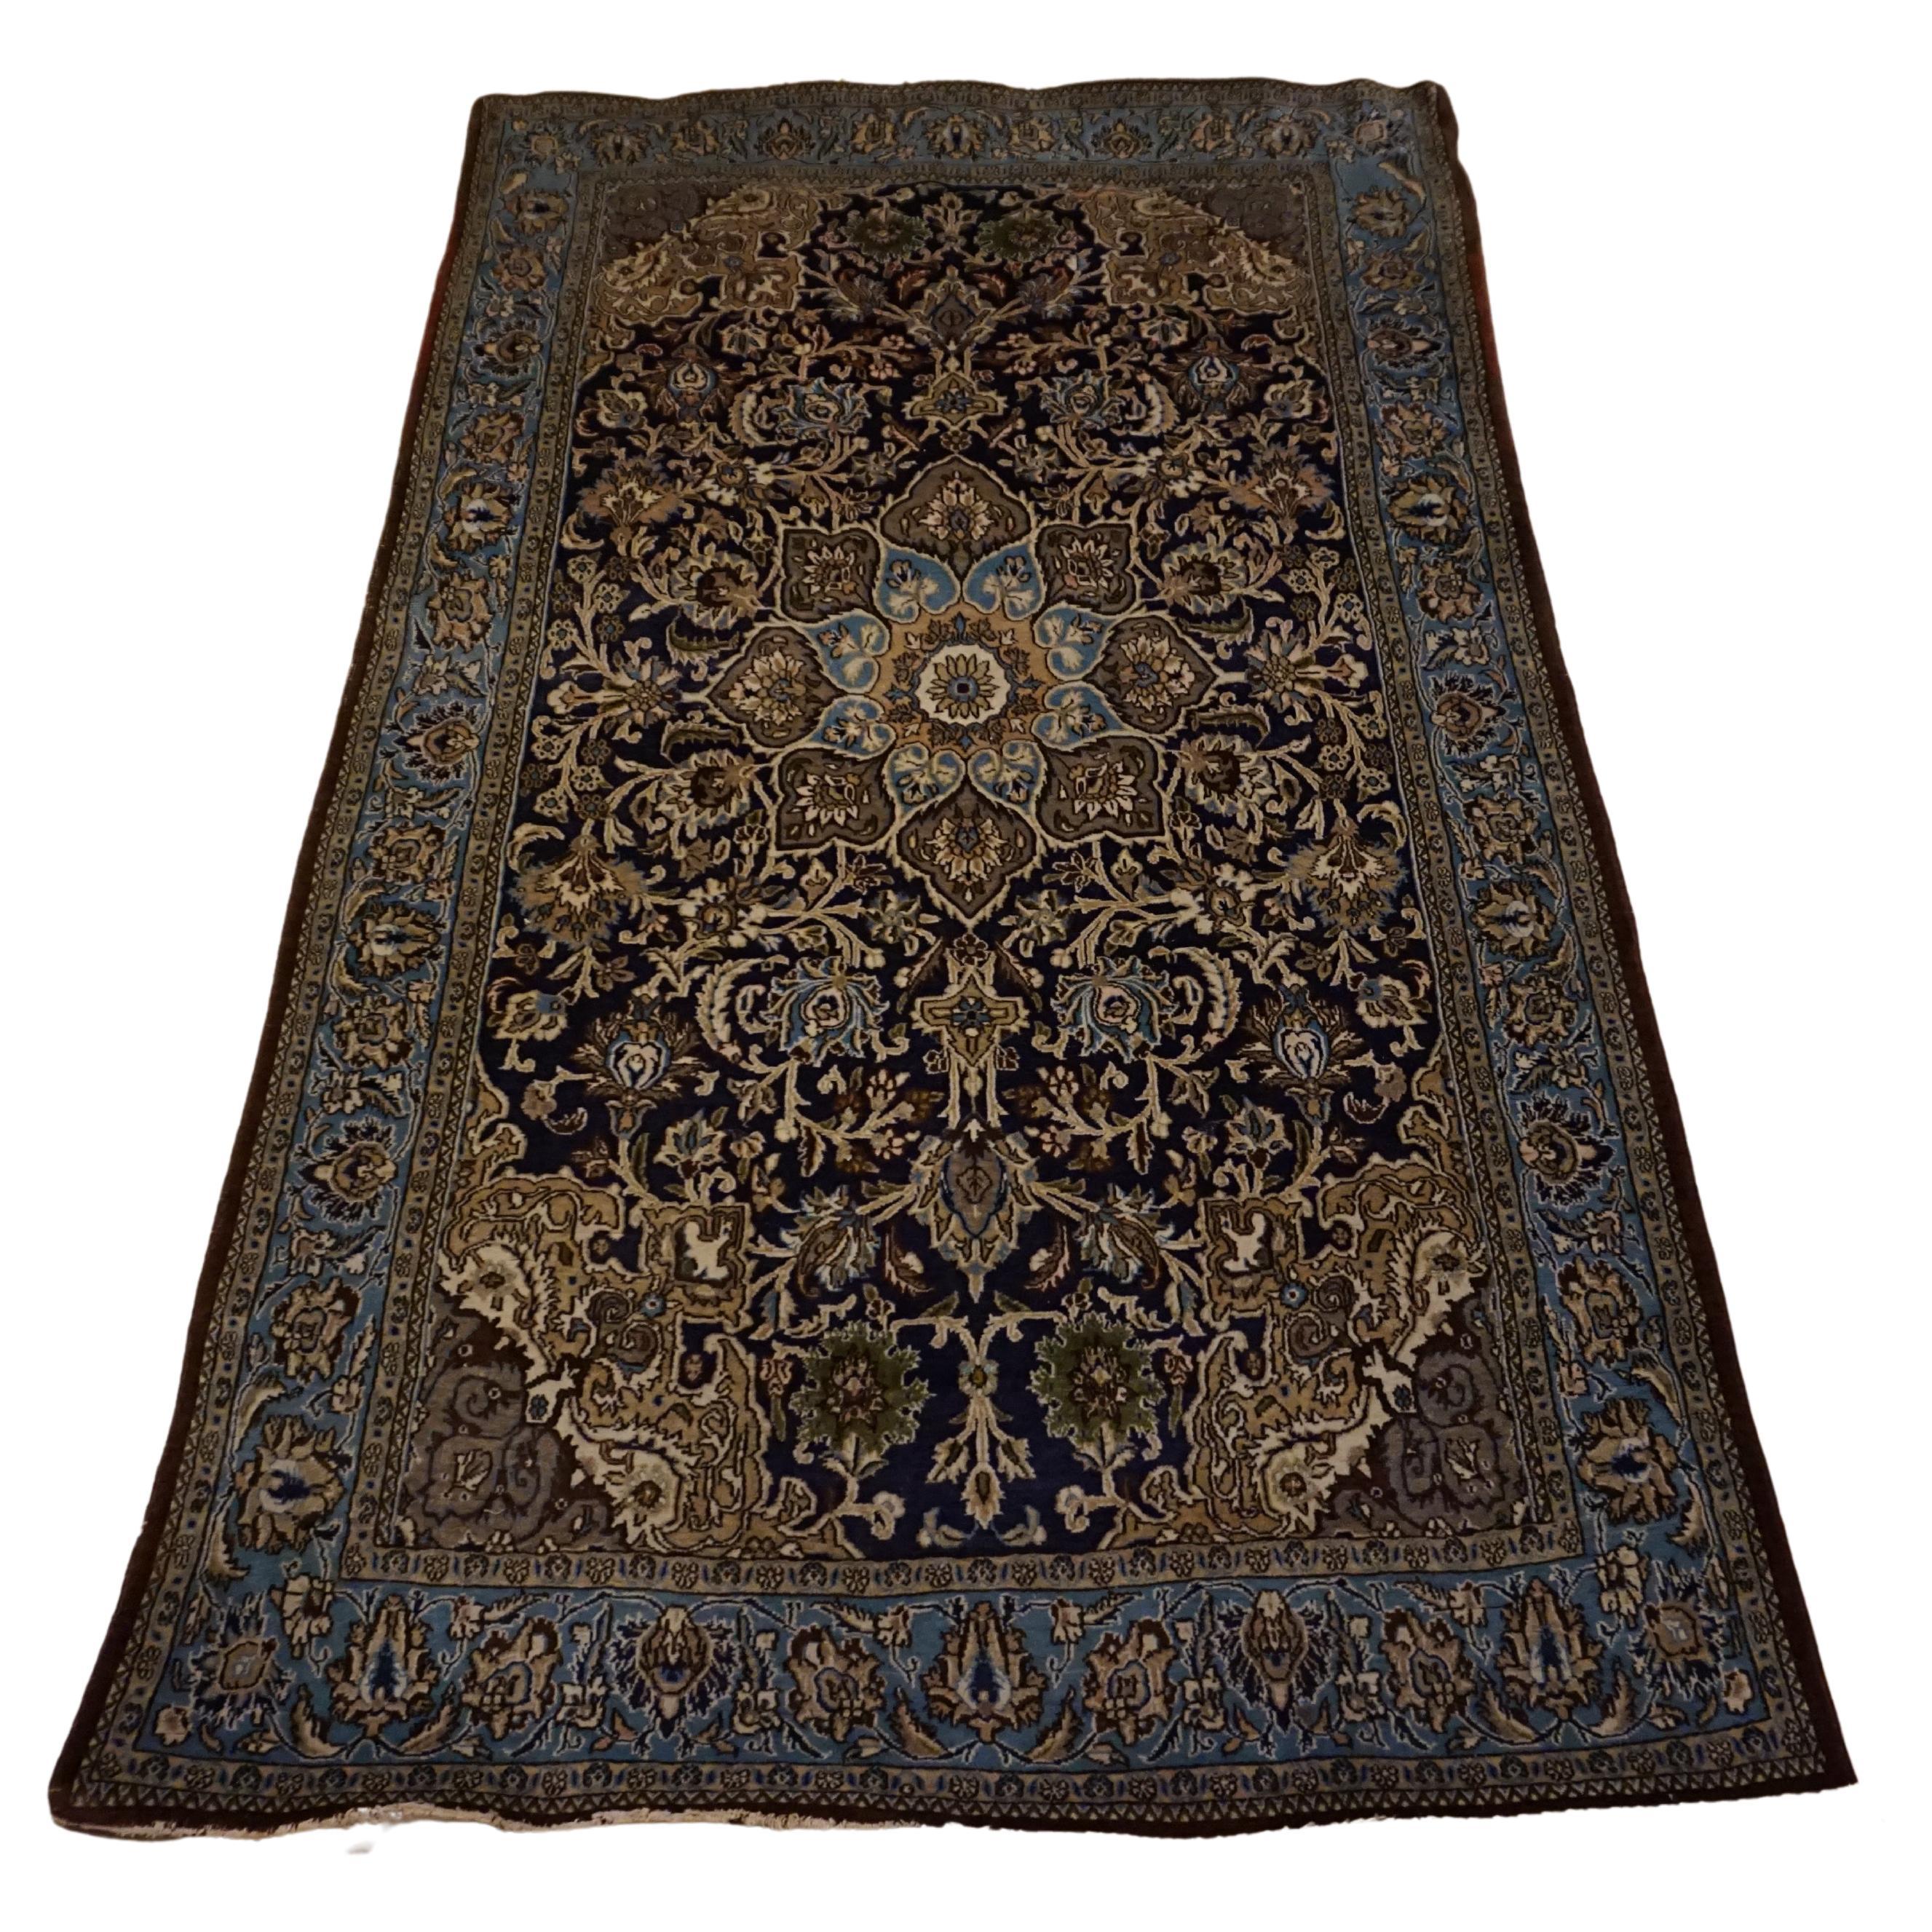 Antique Kashmir Kashan Rug Hand-knotted In Pure Wool In Indigo, Blues & Browns